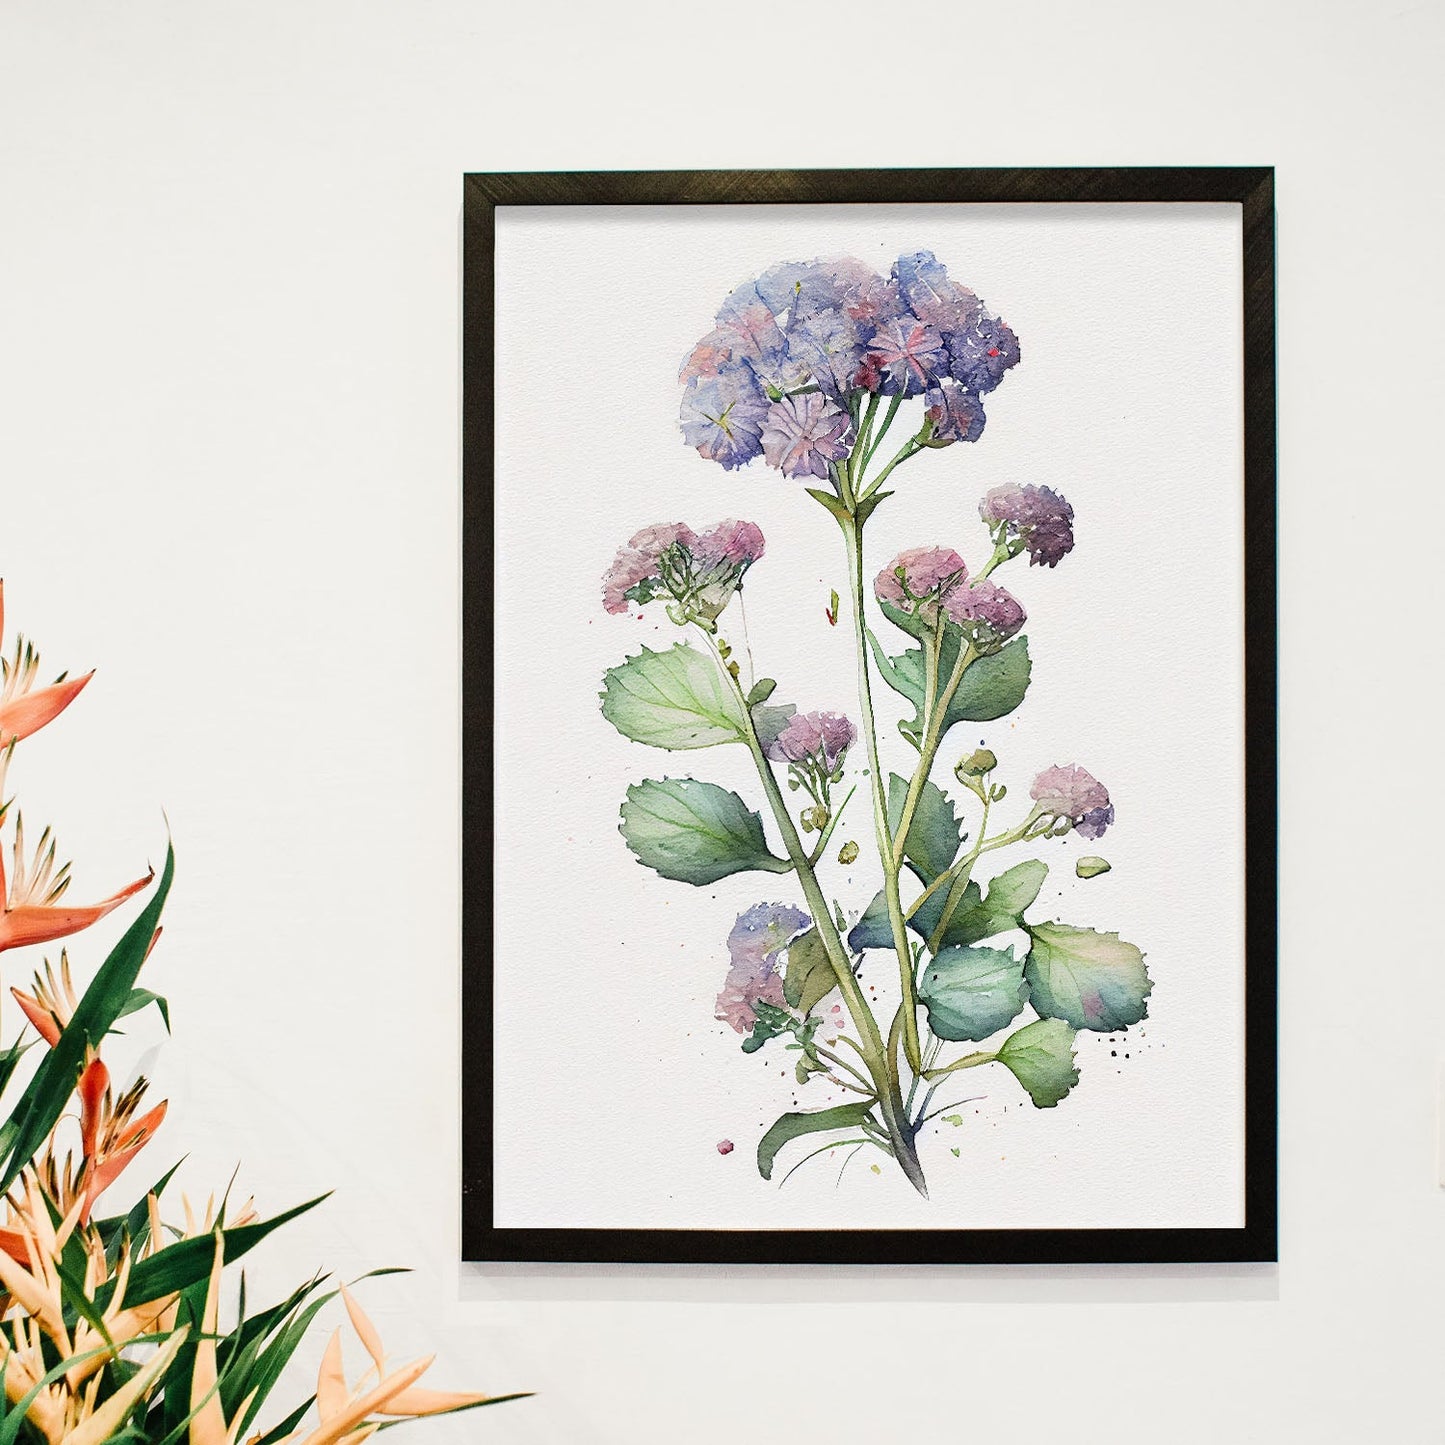 Nacnic watercolor minmal Ageratum_1. Aesthetic Wall Art Prints for Bedroom or Living Room Design.